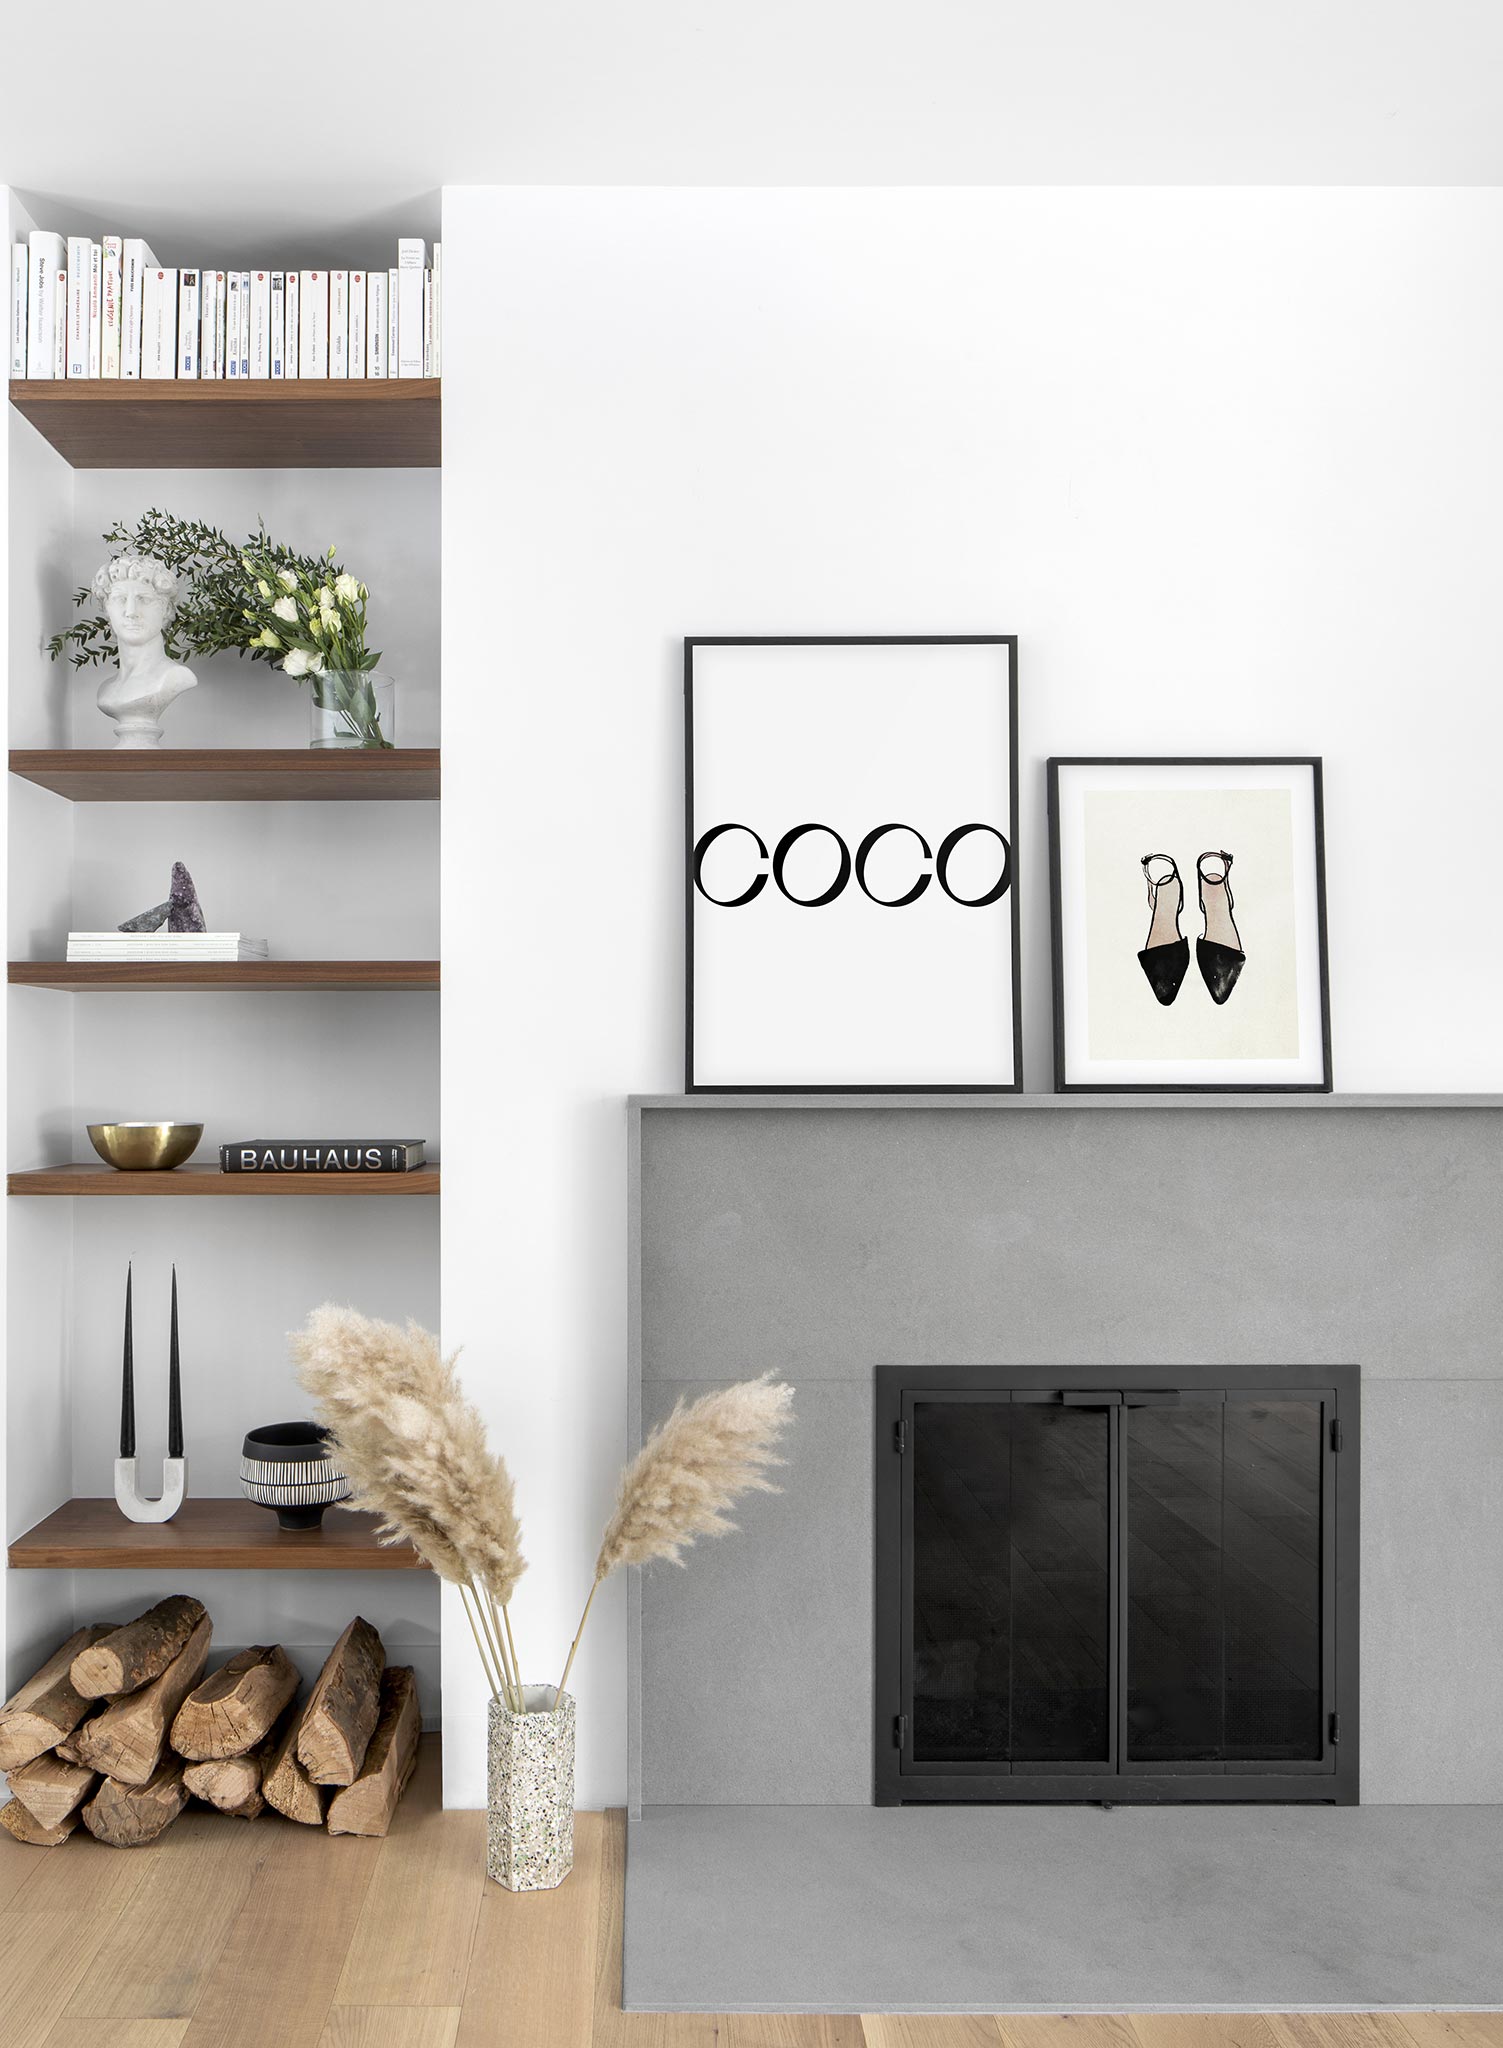 Typography poster by Opposite Wall with quote "coco" for Coco Chanel - Lifestyle Duo - Living Room